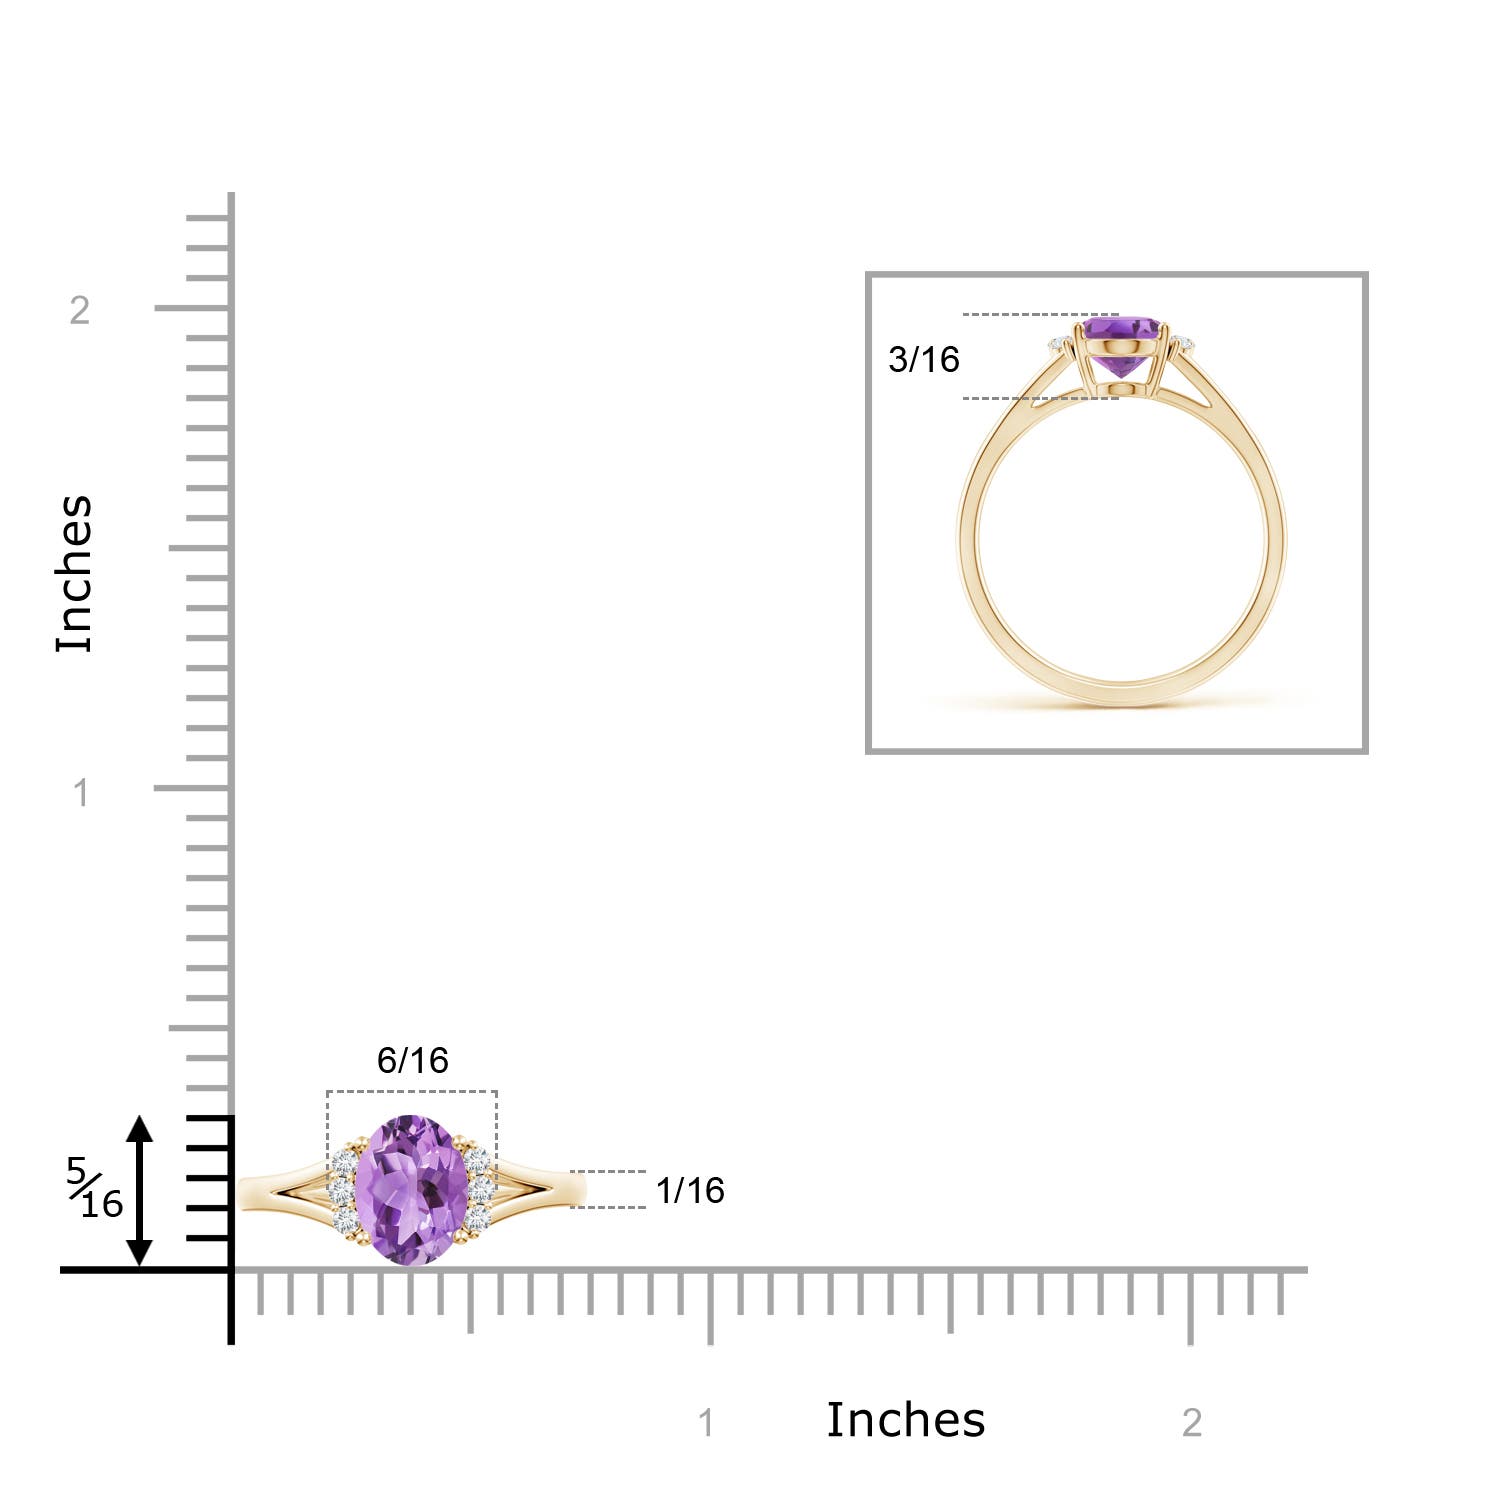 A - Amethyst / 1.23 CT / 14 KT Yellow Gold